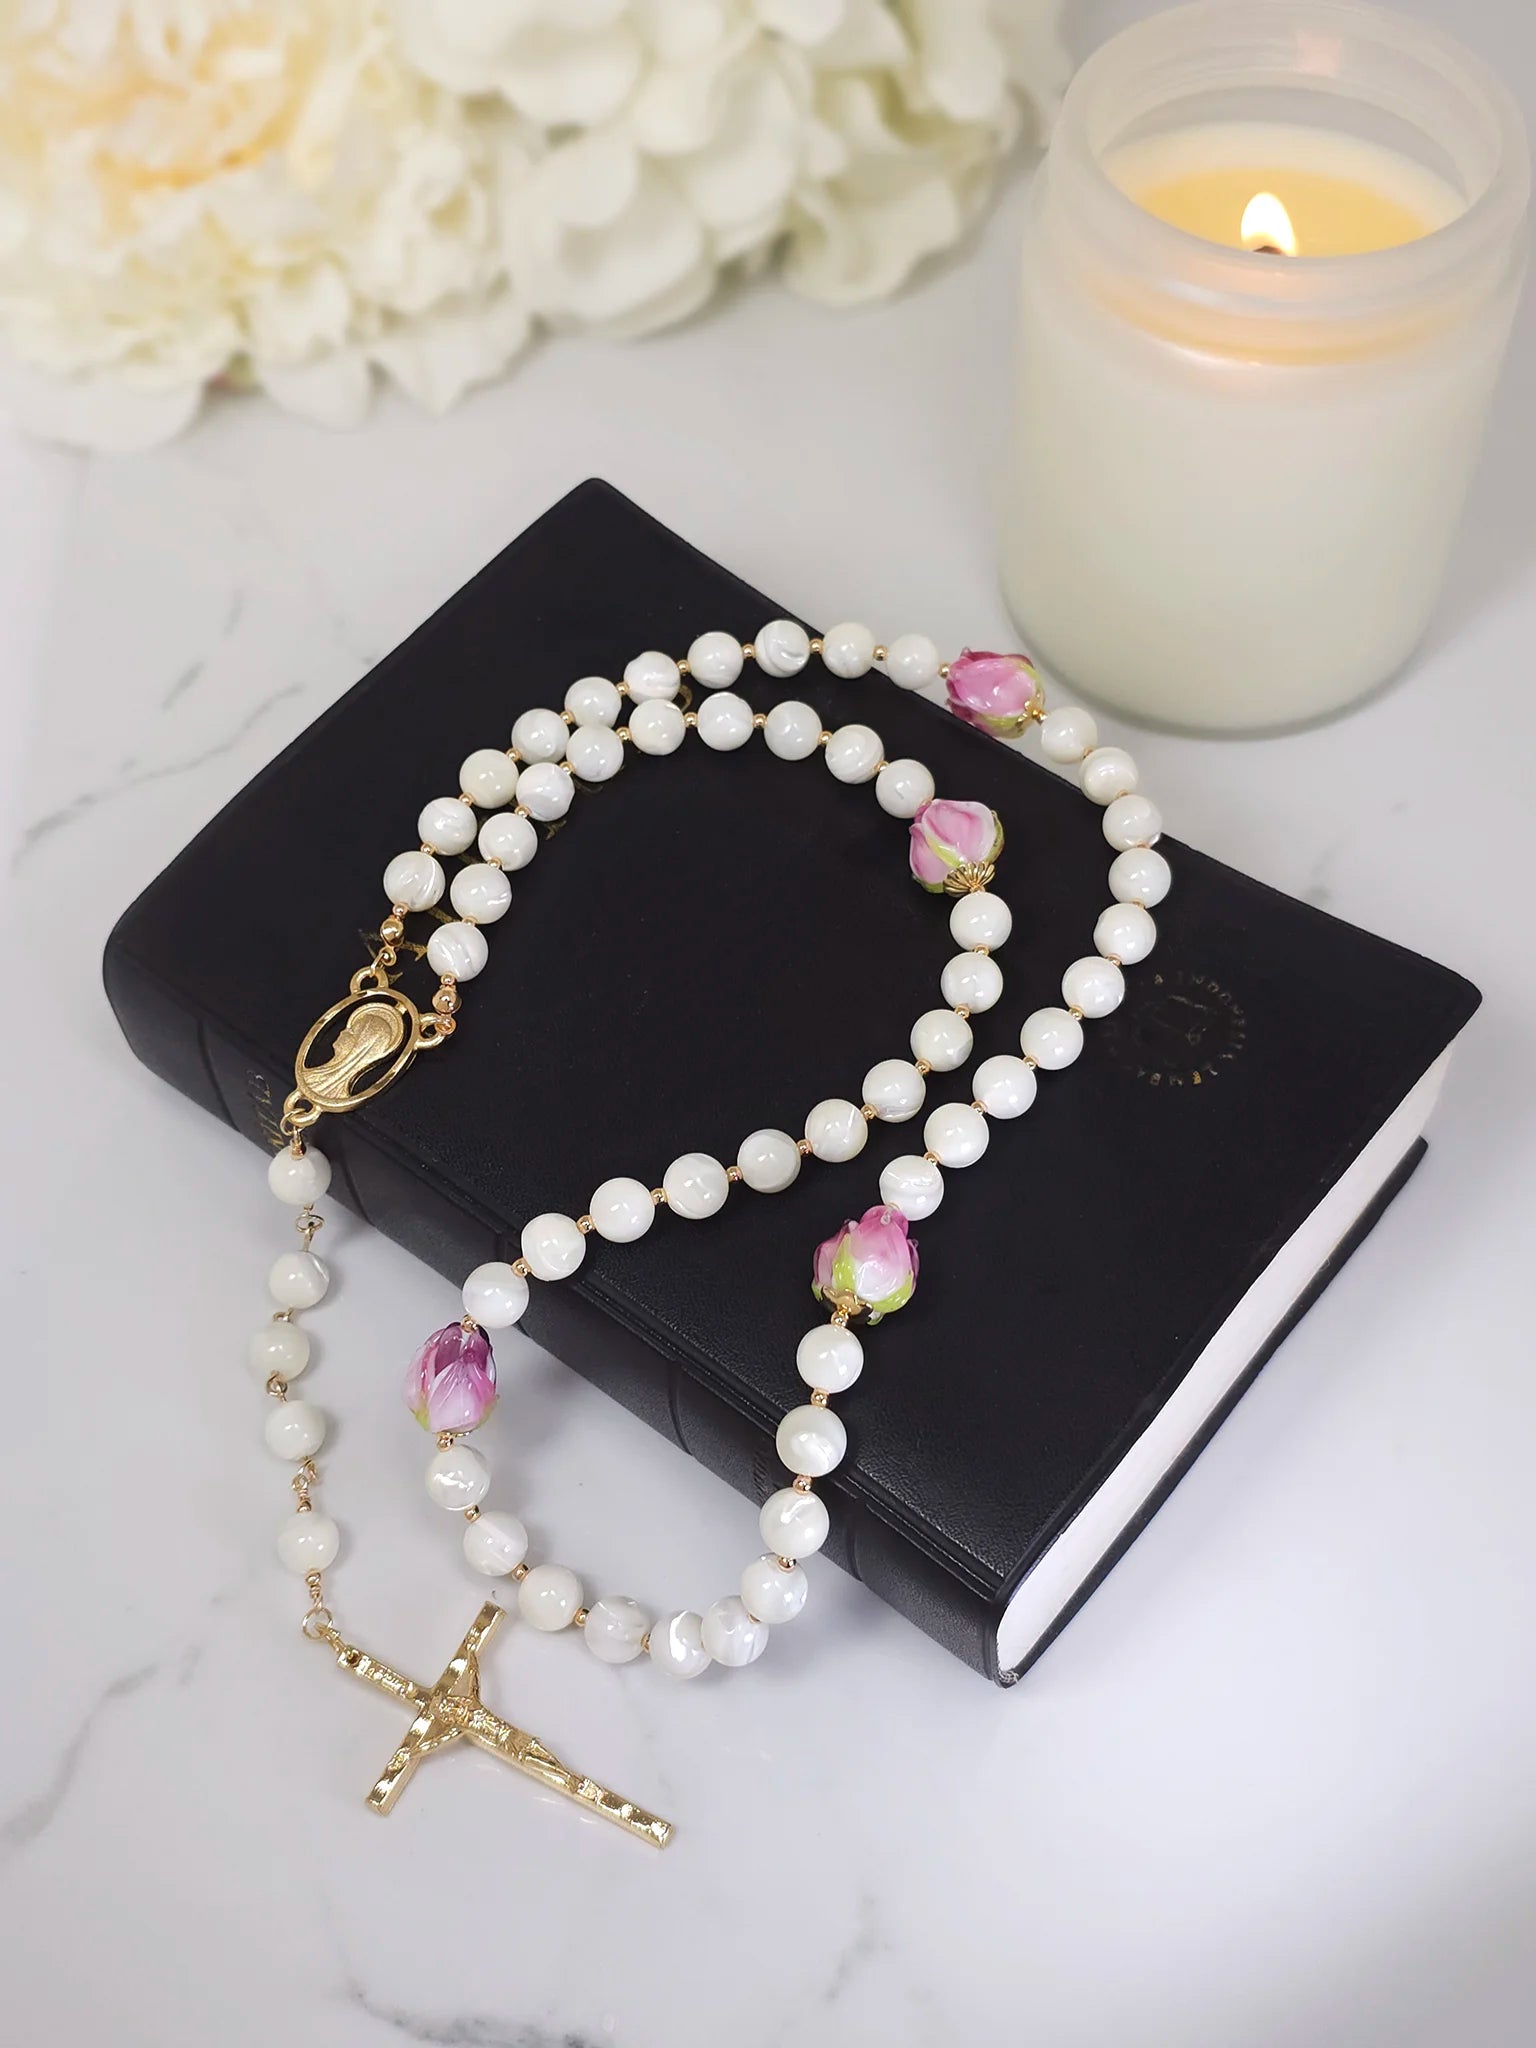 Handcrafted rosary with Mother of Pearl, showcasing a Gold-plated Crucifix pendant.